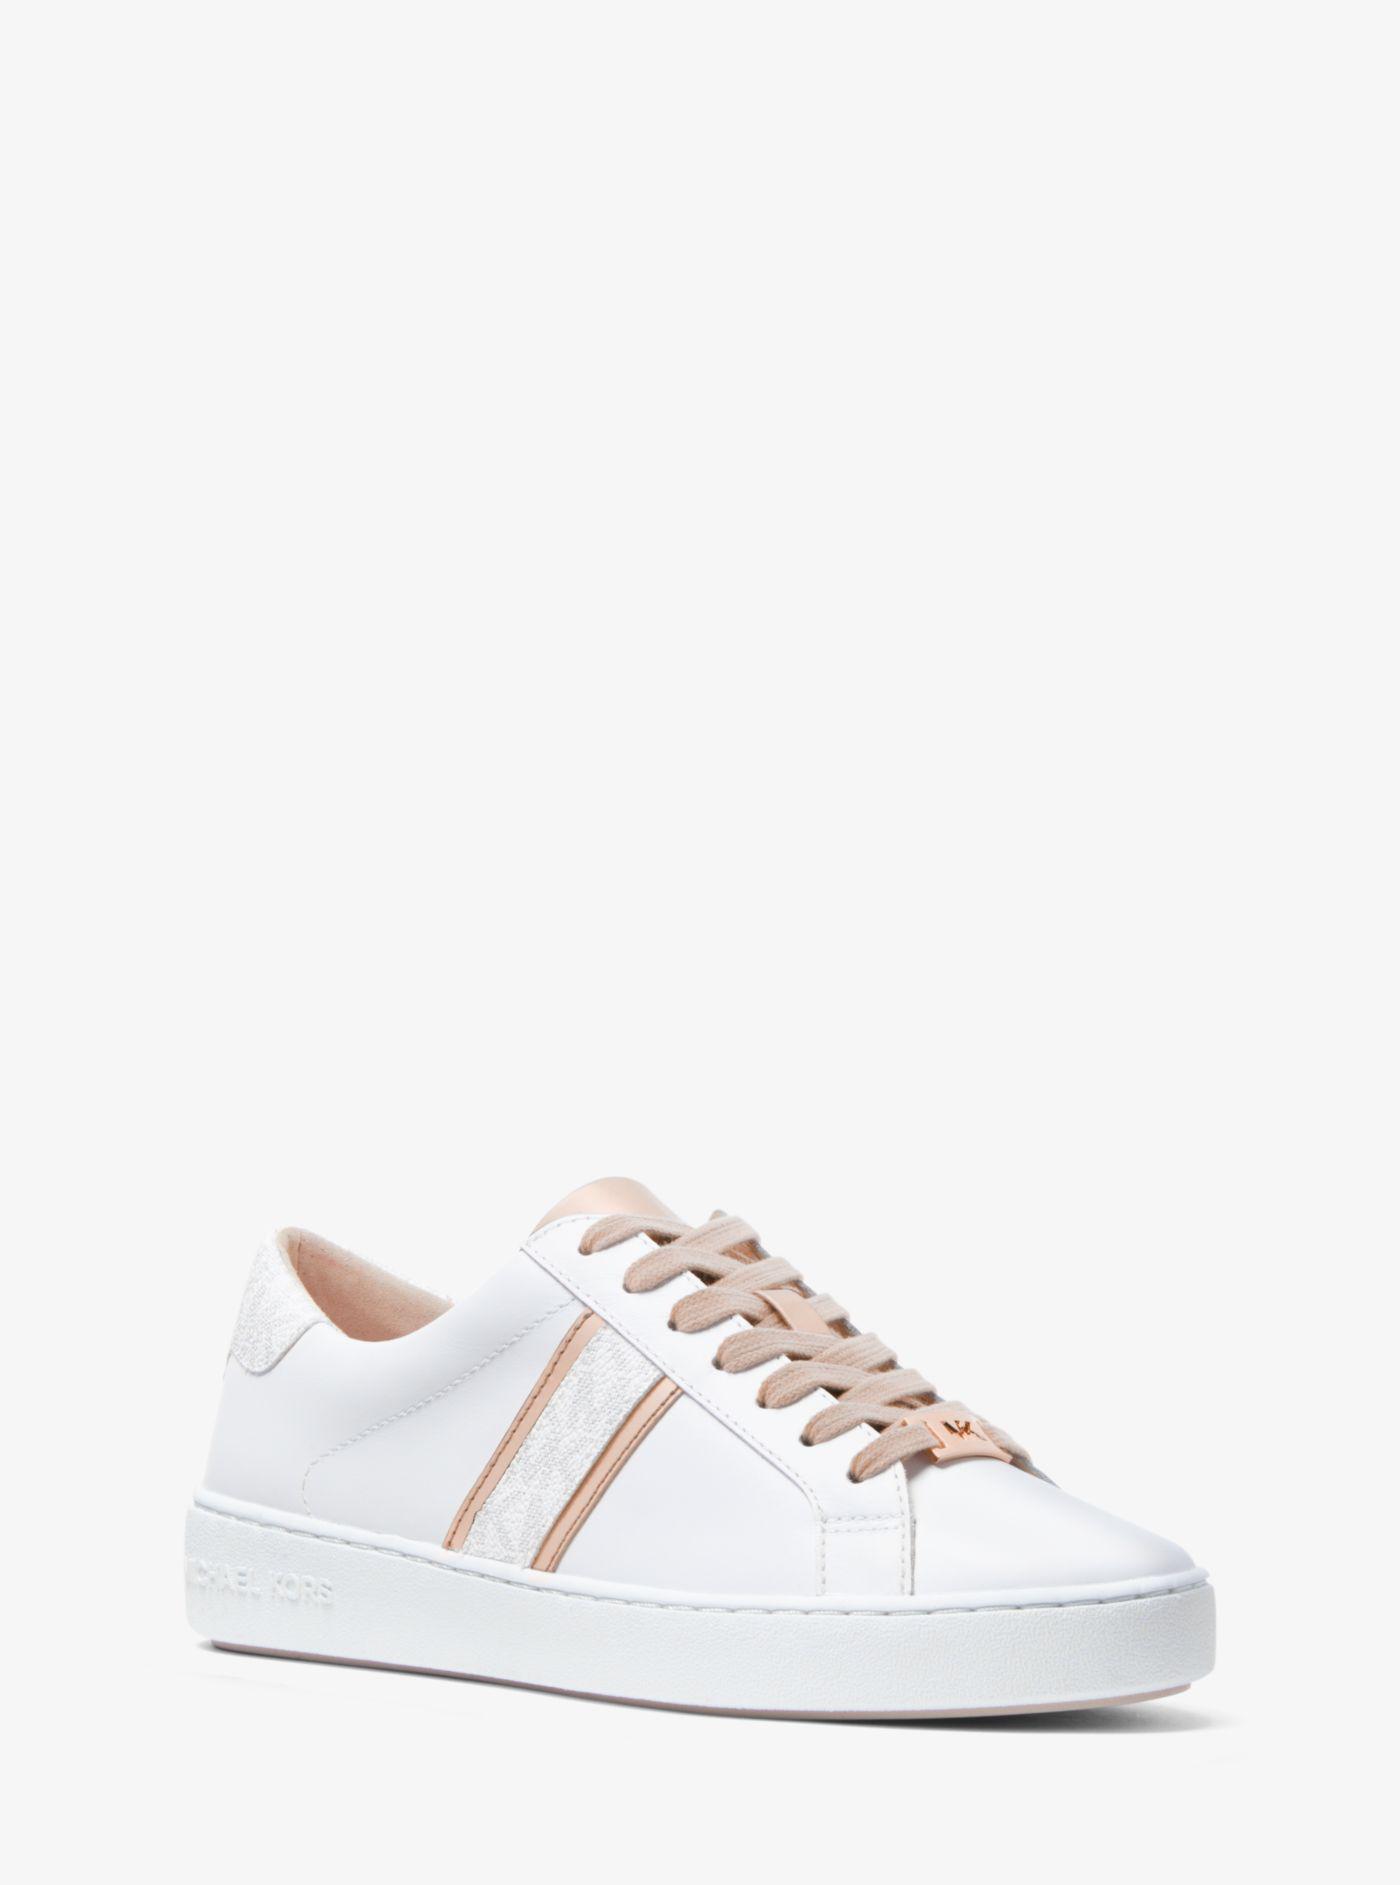 MICHAEL Michael Kors IRVING White  Gold  Free delivery  Spartoo UK    Shoes Low top trainers Women  10480